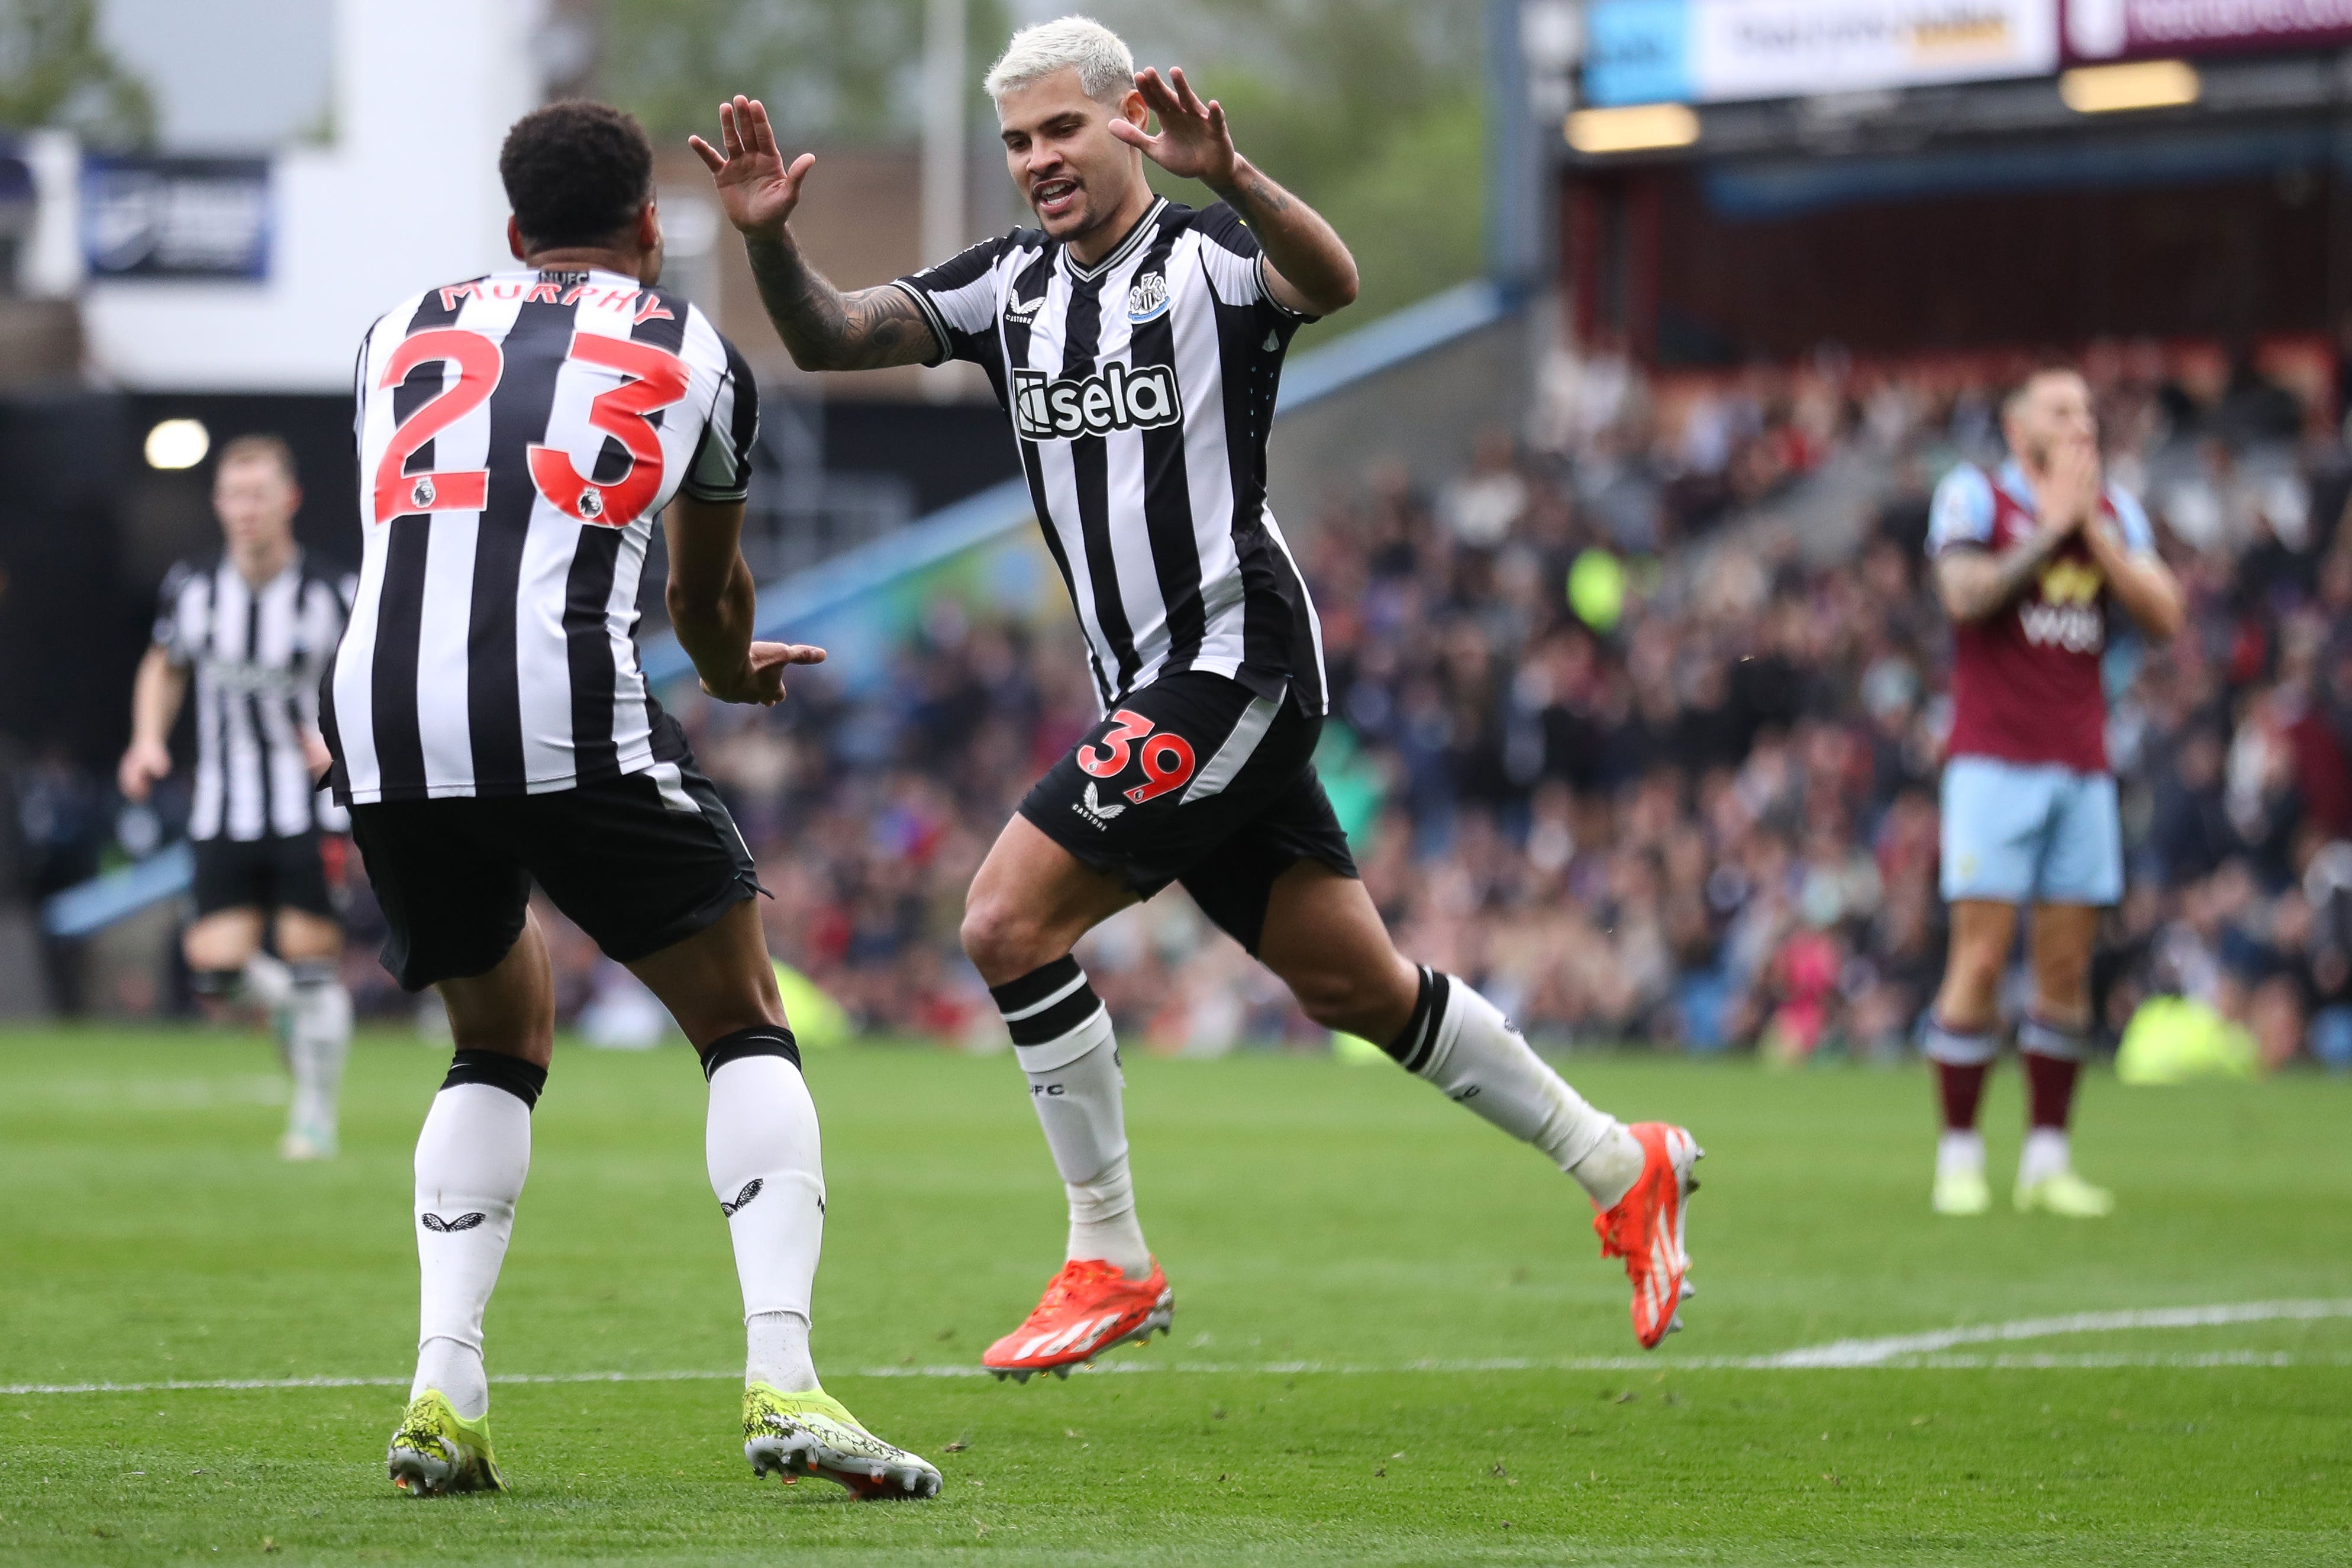 nottingham forest boost survival hopes as newcastle move closer to europe